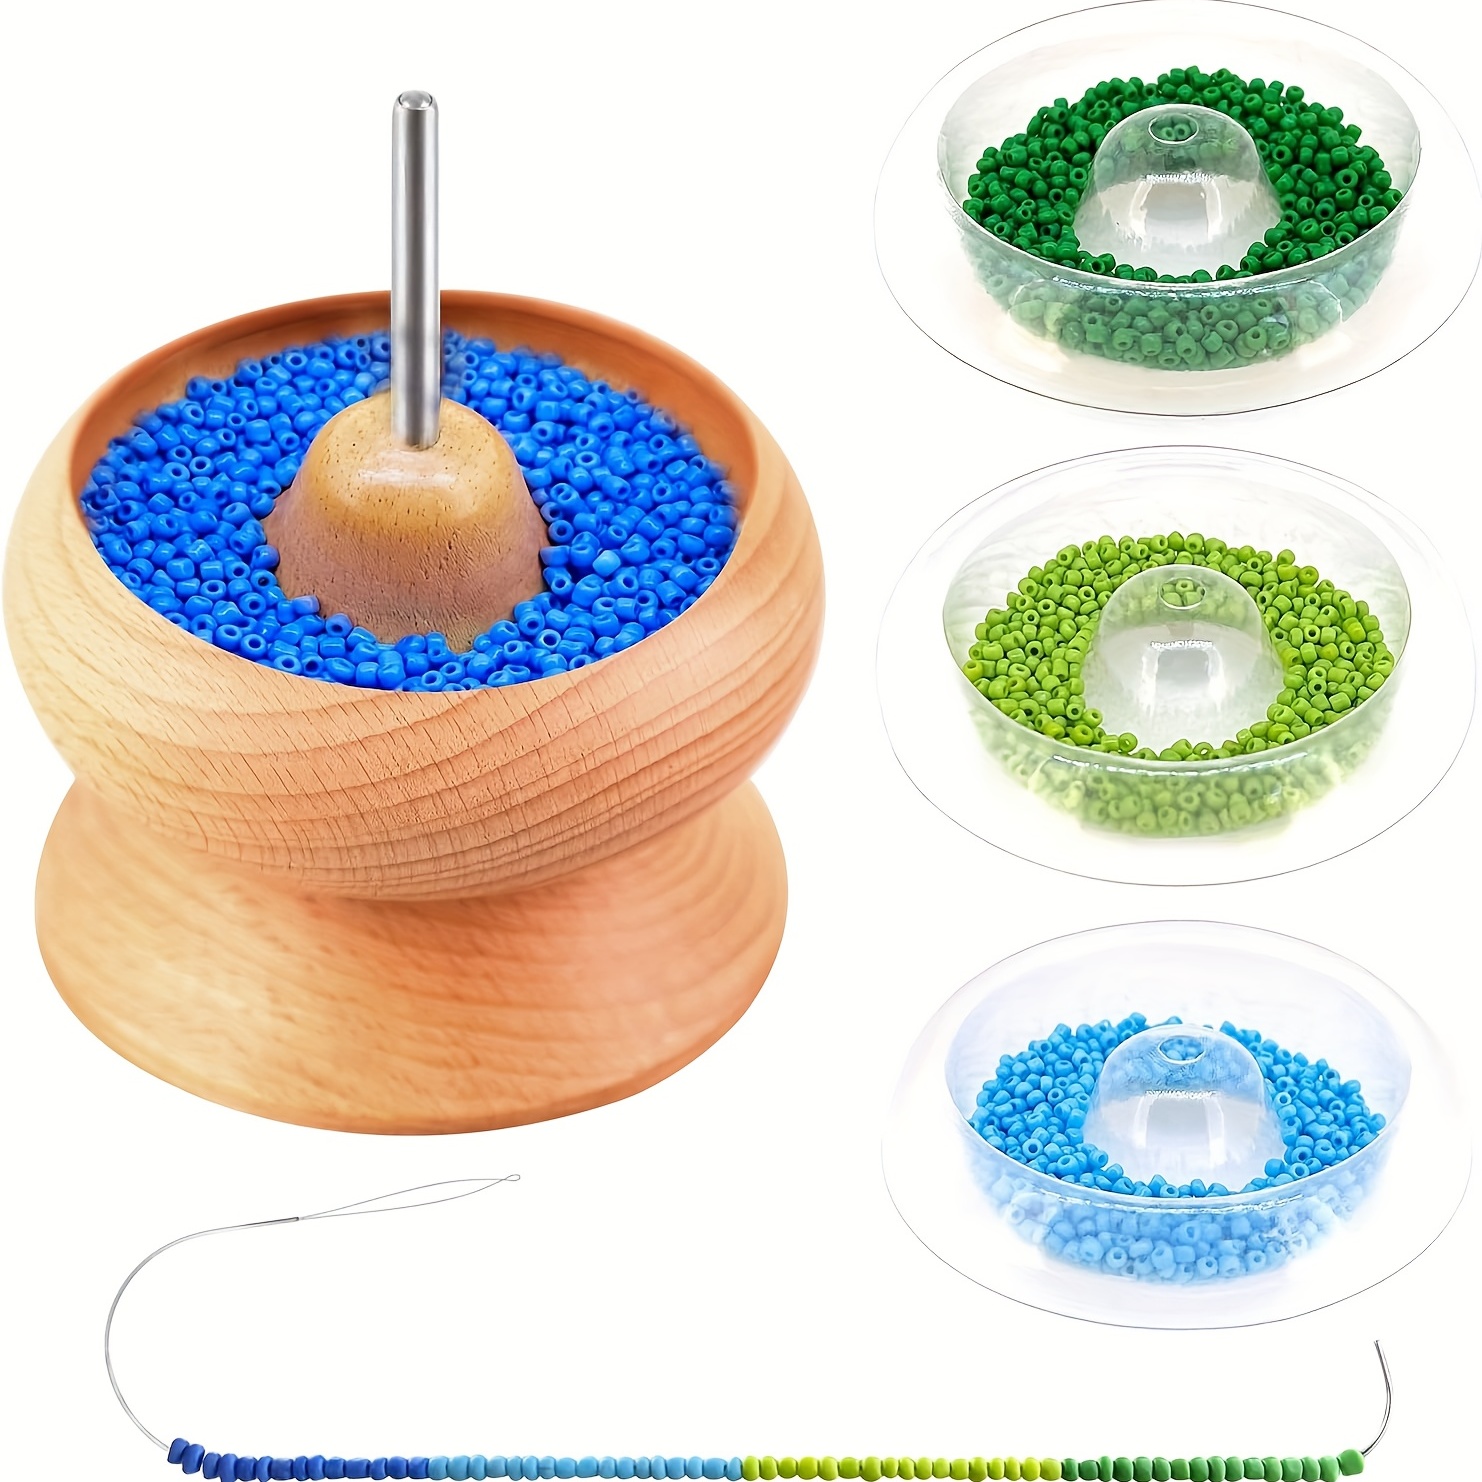 The hobbyworker Beading Bowl Spinner Fourth Generation with Beading Th